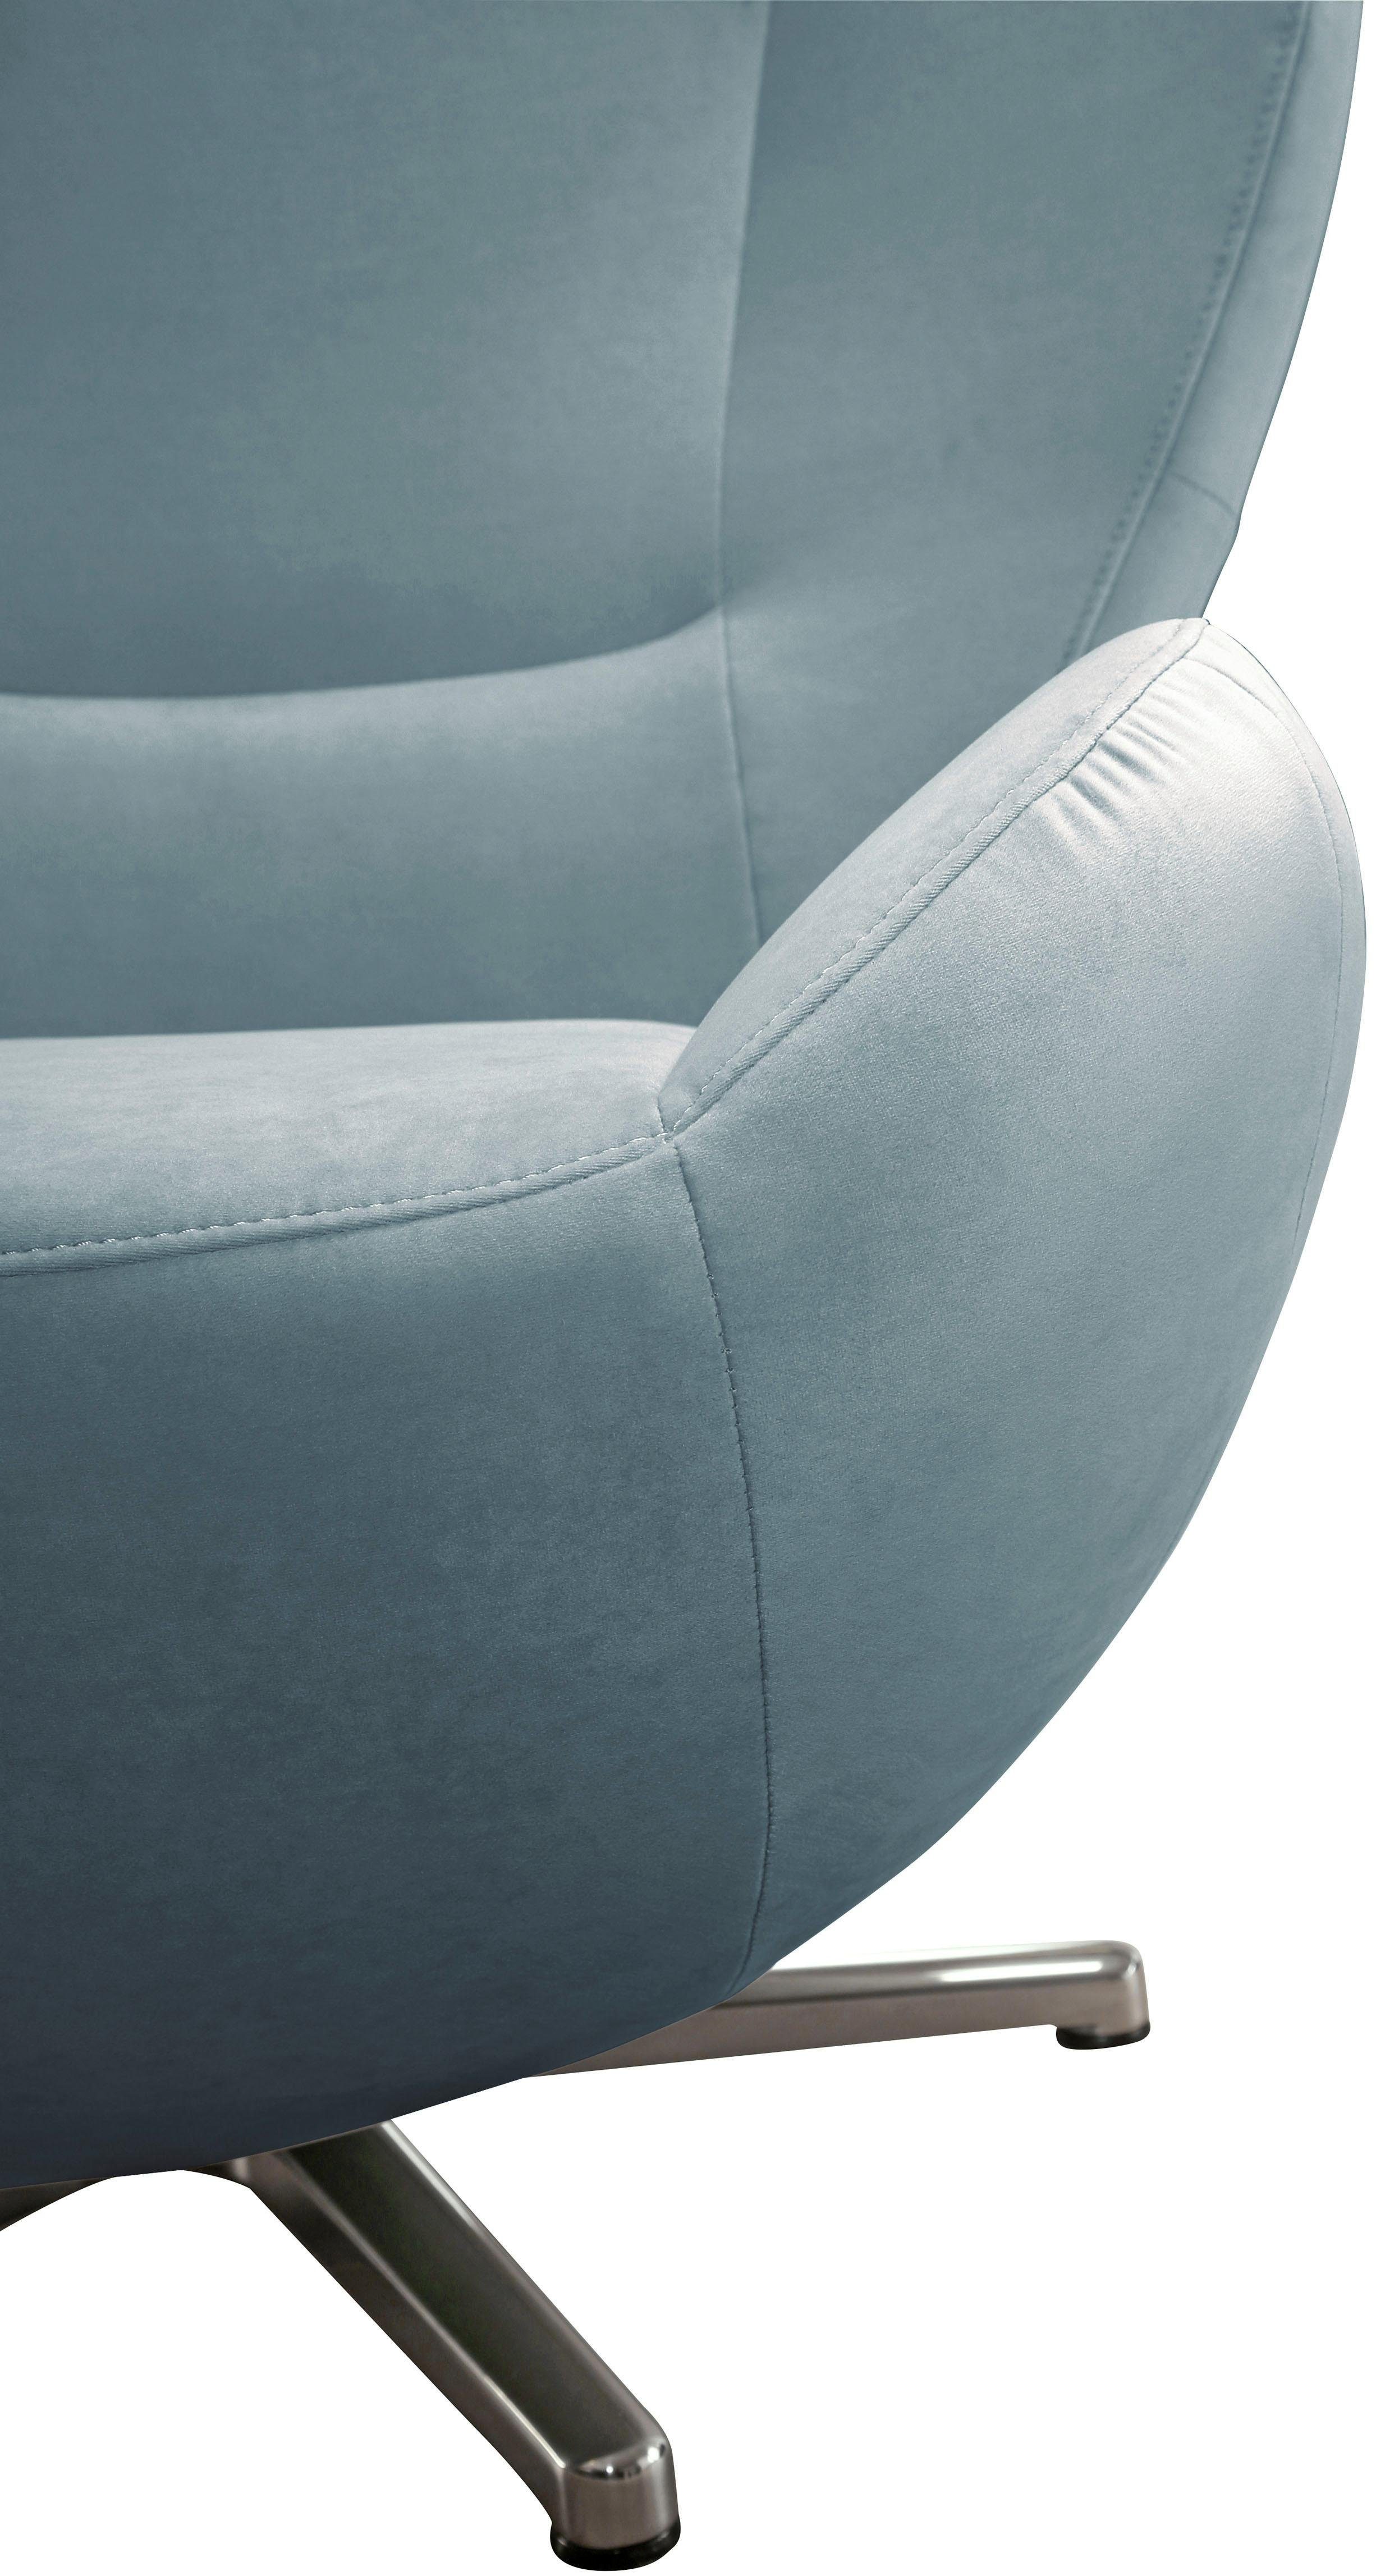 PURE, TOM TOM TAILOR Loungesessel mit HOME Chrom Metall-Drehfuß in